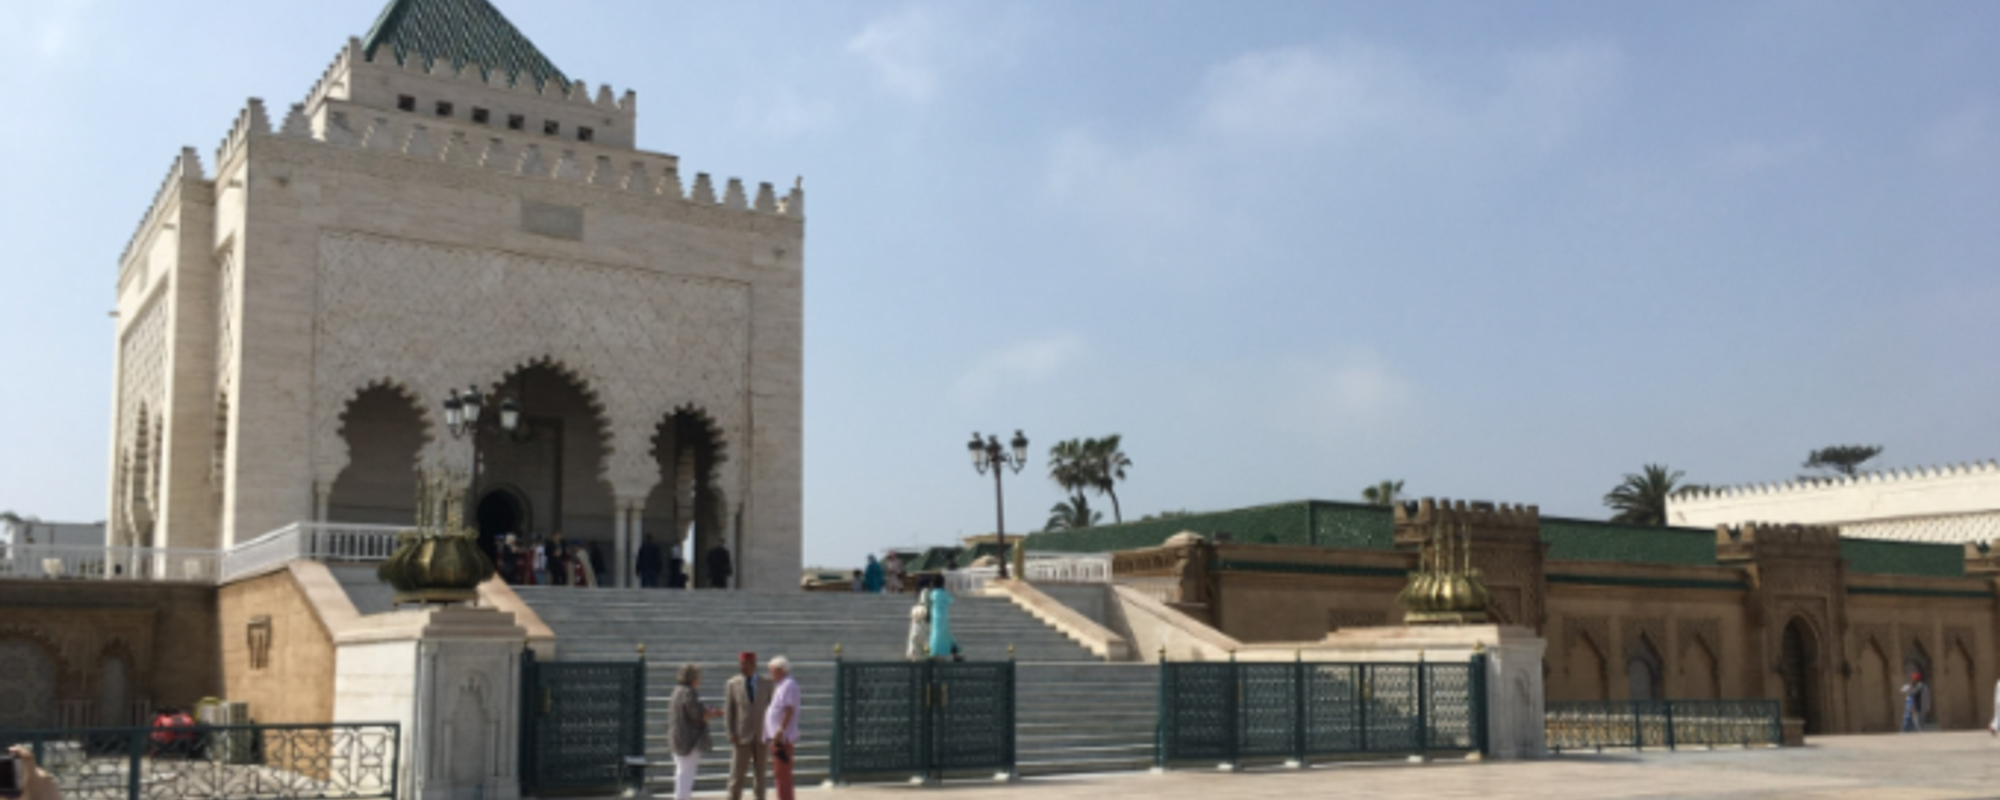 Mausoleum of Mohammed V and Hassan Tower - Rabat, Morocco